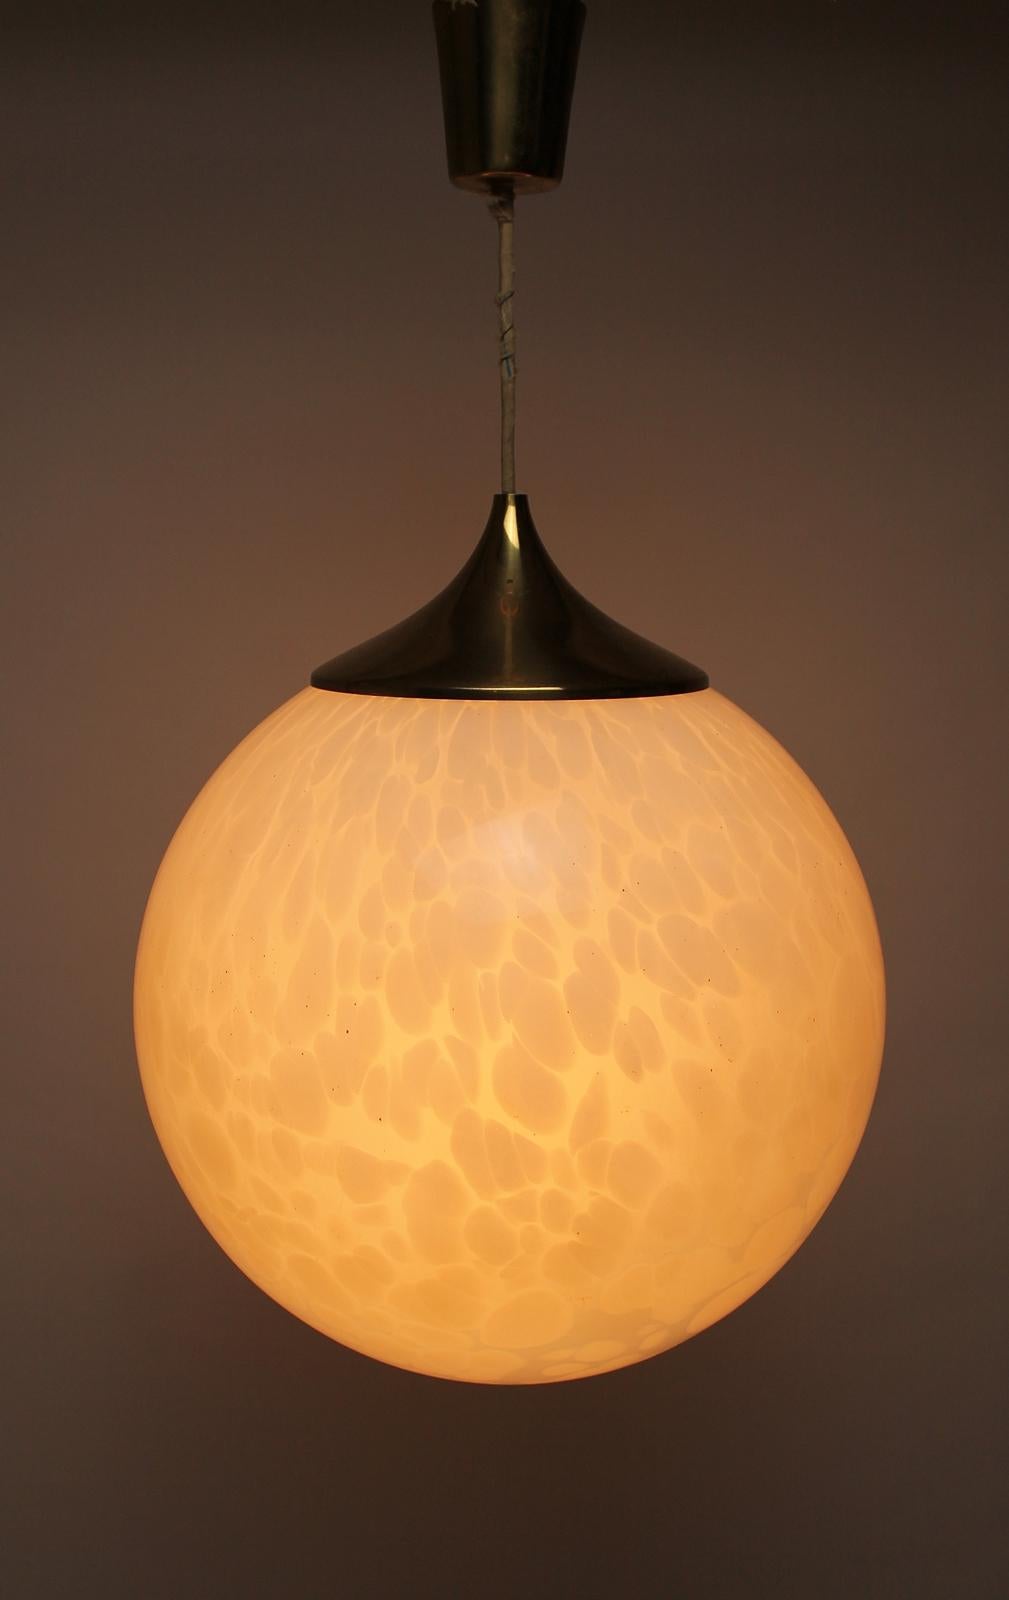 A very impressive A Murano Mazzega large globe pendant chandelier in white mottled blown glass from the 1970s
The Murano glass has a bubble effect encased in the glass.
In good vintage condition with no chips.
The lamp takes one standard base